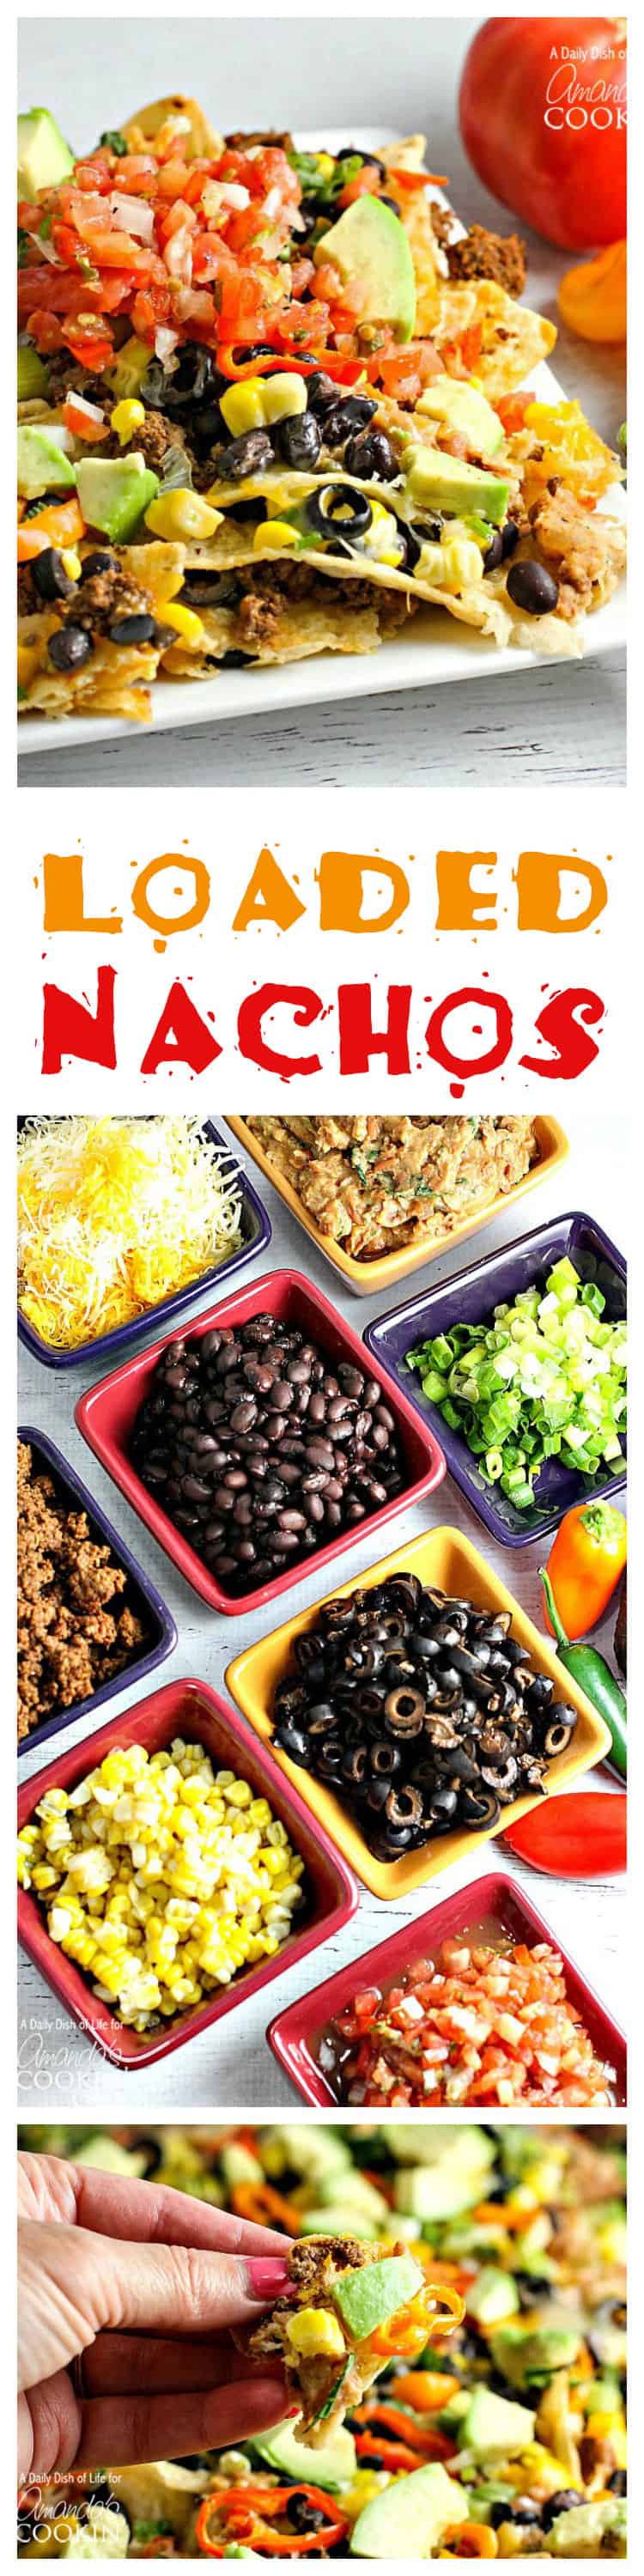 Square bowls filled a variety of topping such as cheese, black beans, green onions, taco meat, and chicken.